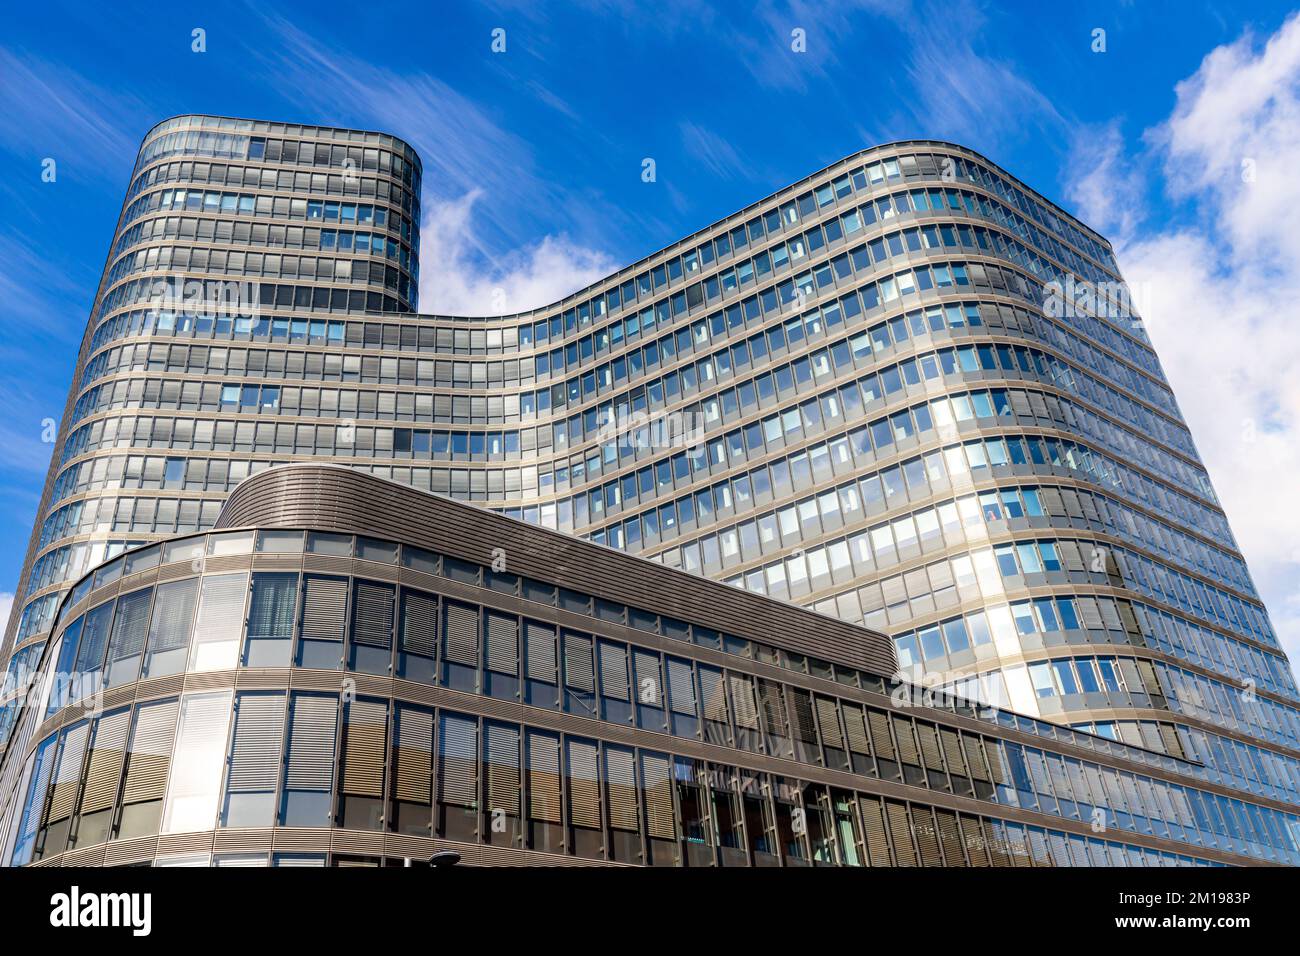 Modern buildings in Vienna. Beautiful buildings with large glass windows in Vienna, Austria. Stock Photo